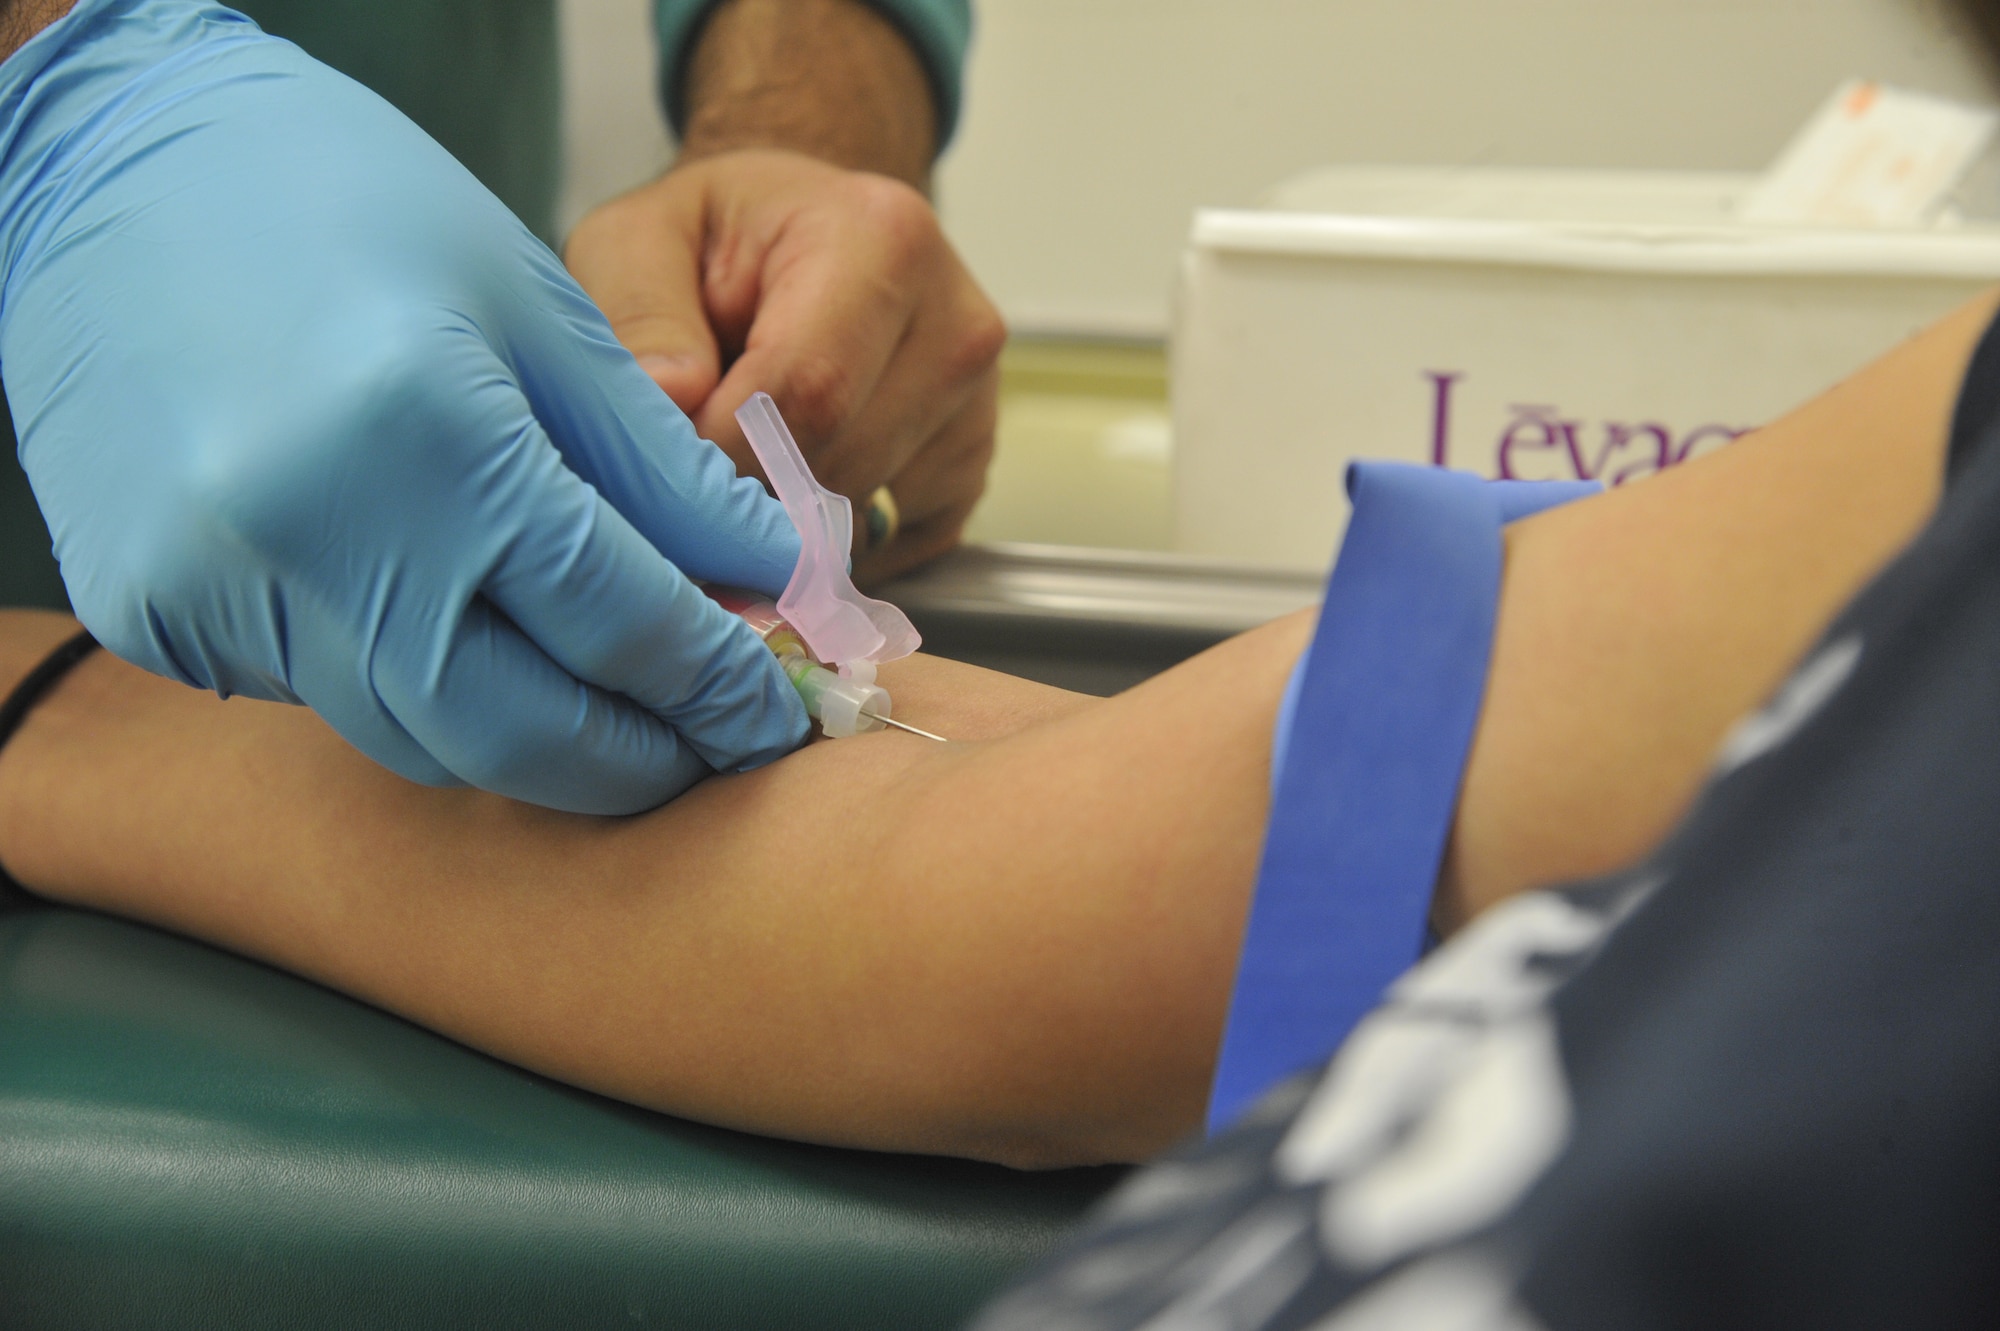 U.S. Air Force Tech. Sgt. Raul Loyo, 509th Medical Support Squadron NCO in charge of microbiology, collects blood sample from a patient at Whiteman Air Force Base, Mo., May 13, 2014. Samples collected are used to test for diseases and illnesses. (U.S. Air Force photo by Airman 1st Keenan Berry/Released)